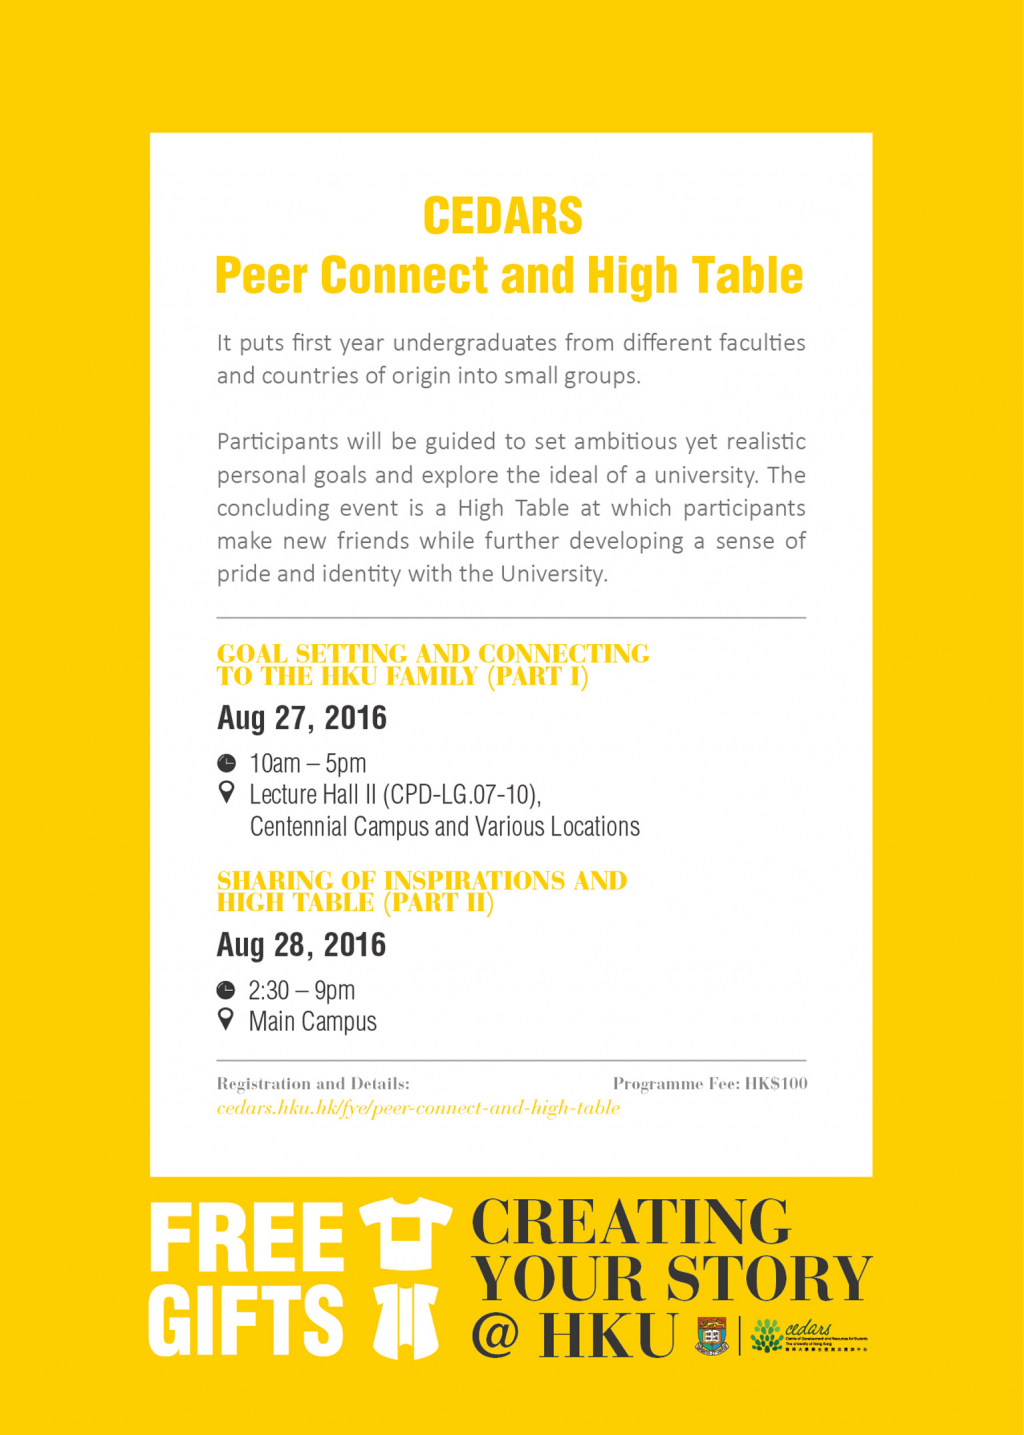 Join CEDARS Peer Connect and High Table (27 - 28 Aug)